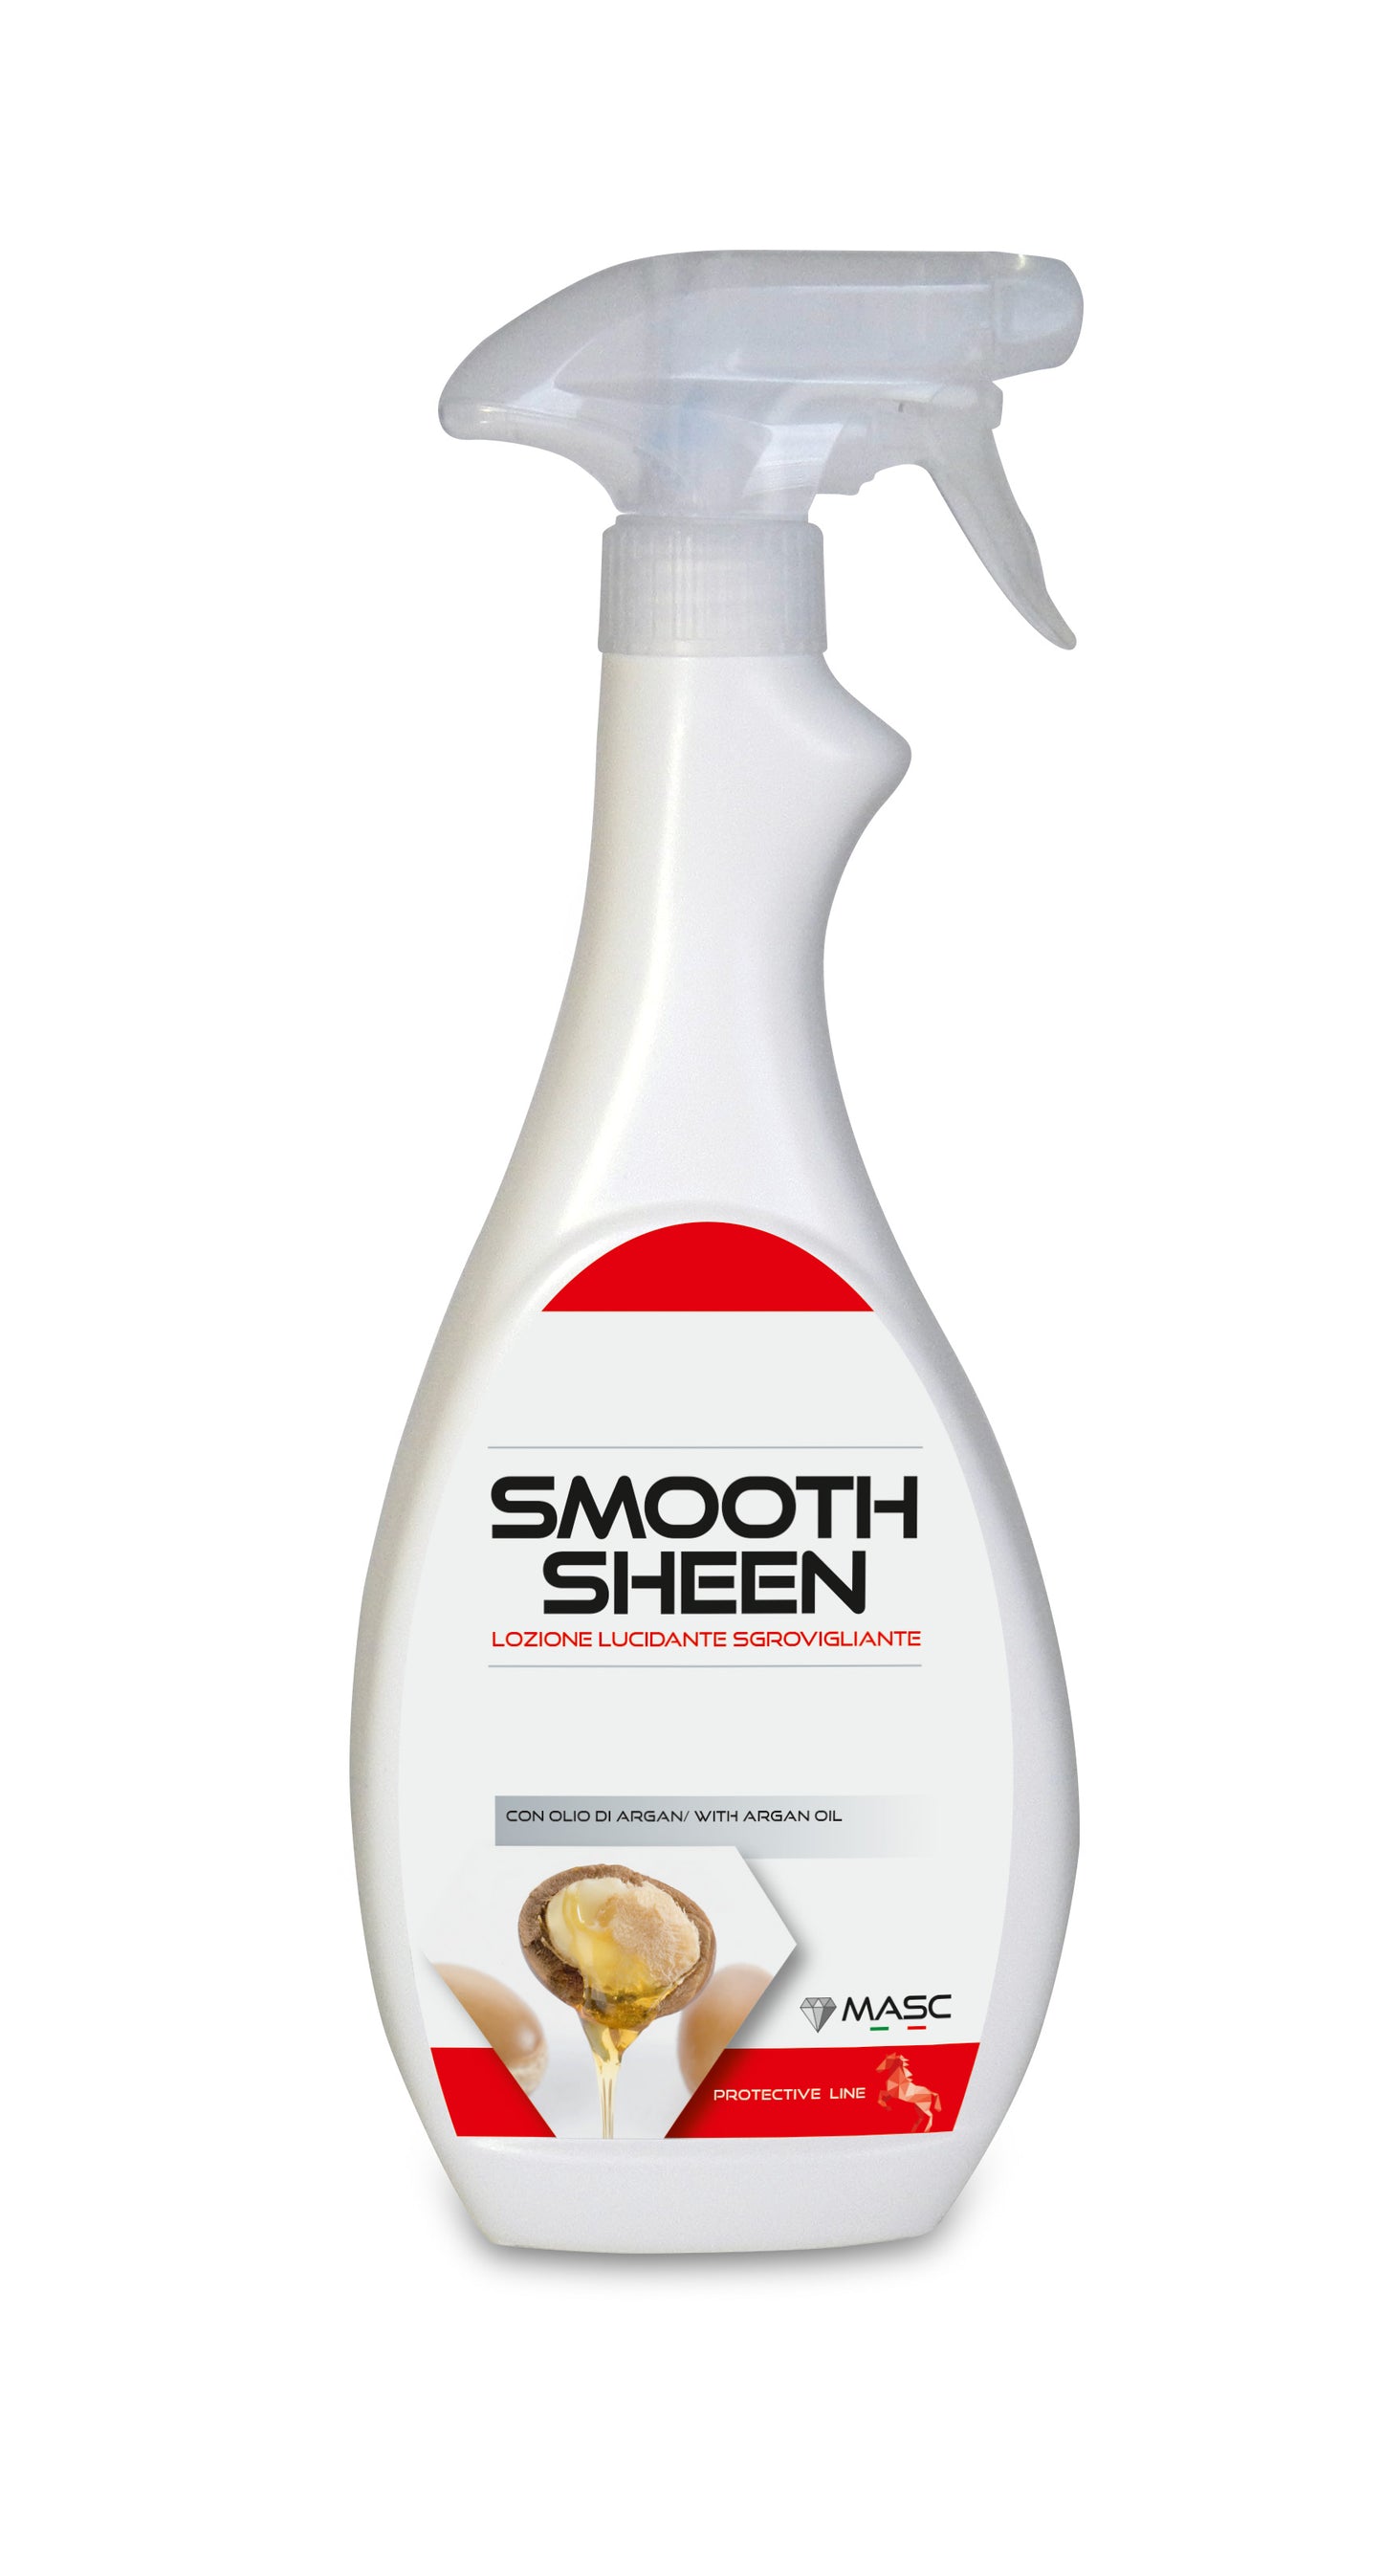 Smooth Sheen | Argan Oil Polishing Lotion for Horse Grooming